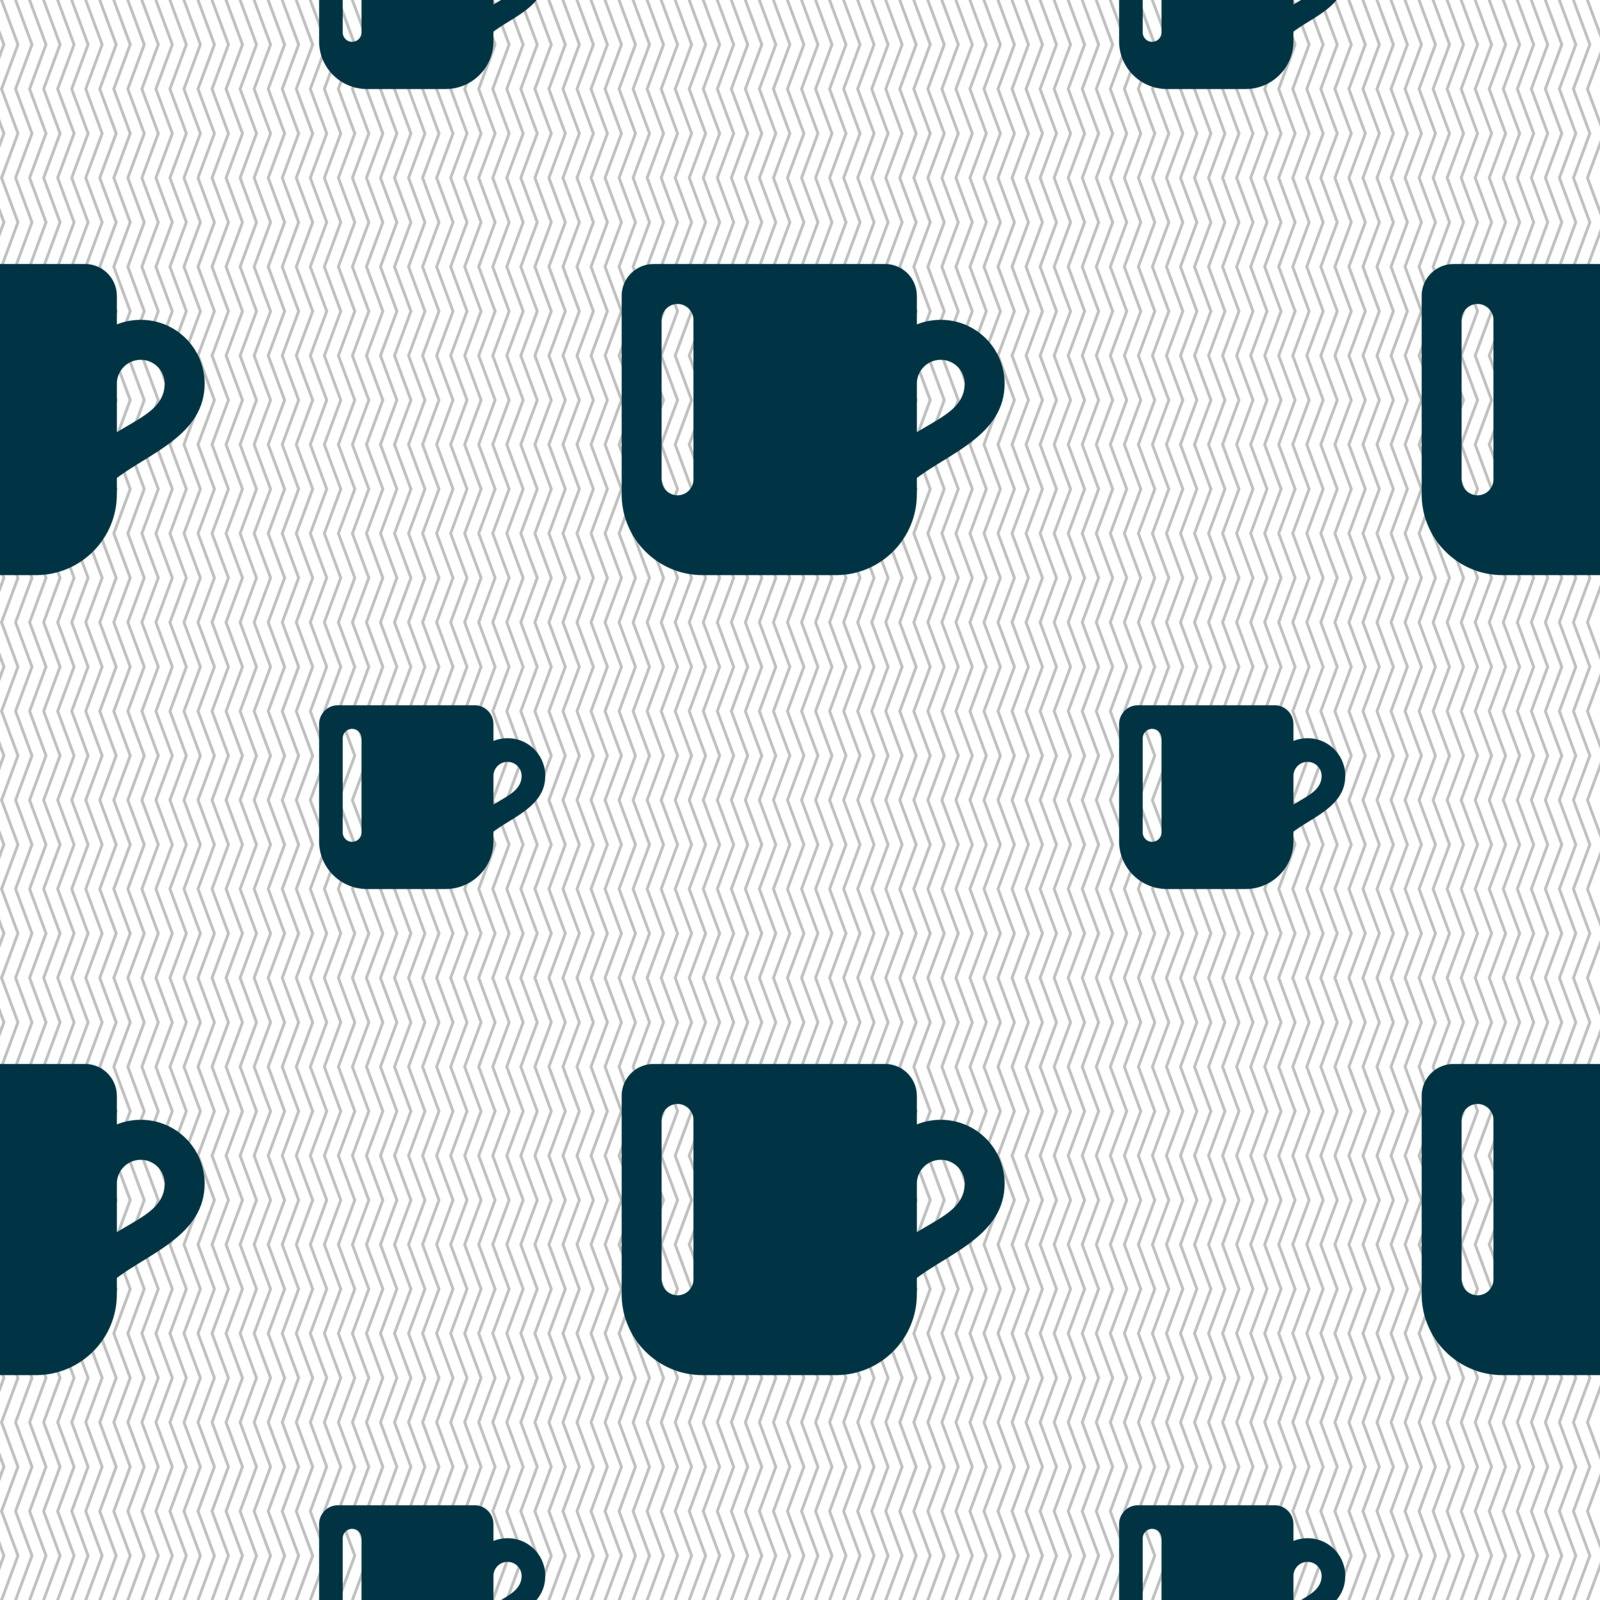 cup coffee or tea icon sign. Seamless pattern with geometric texture. Vector illustration